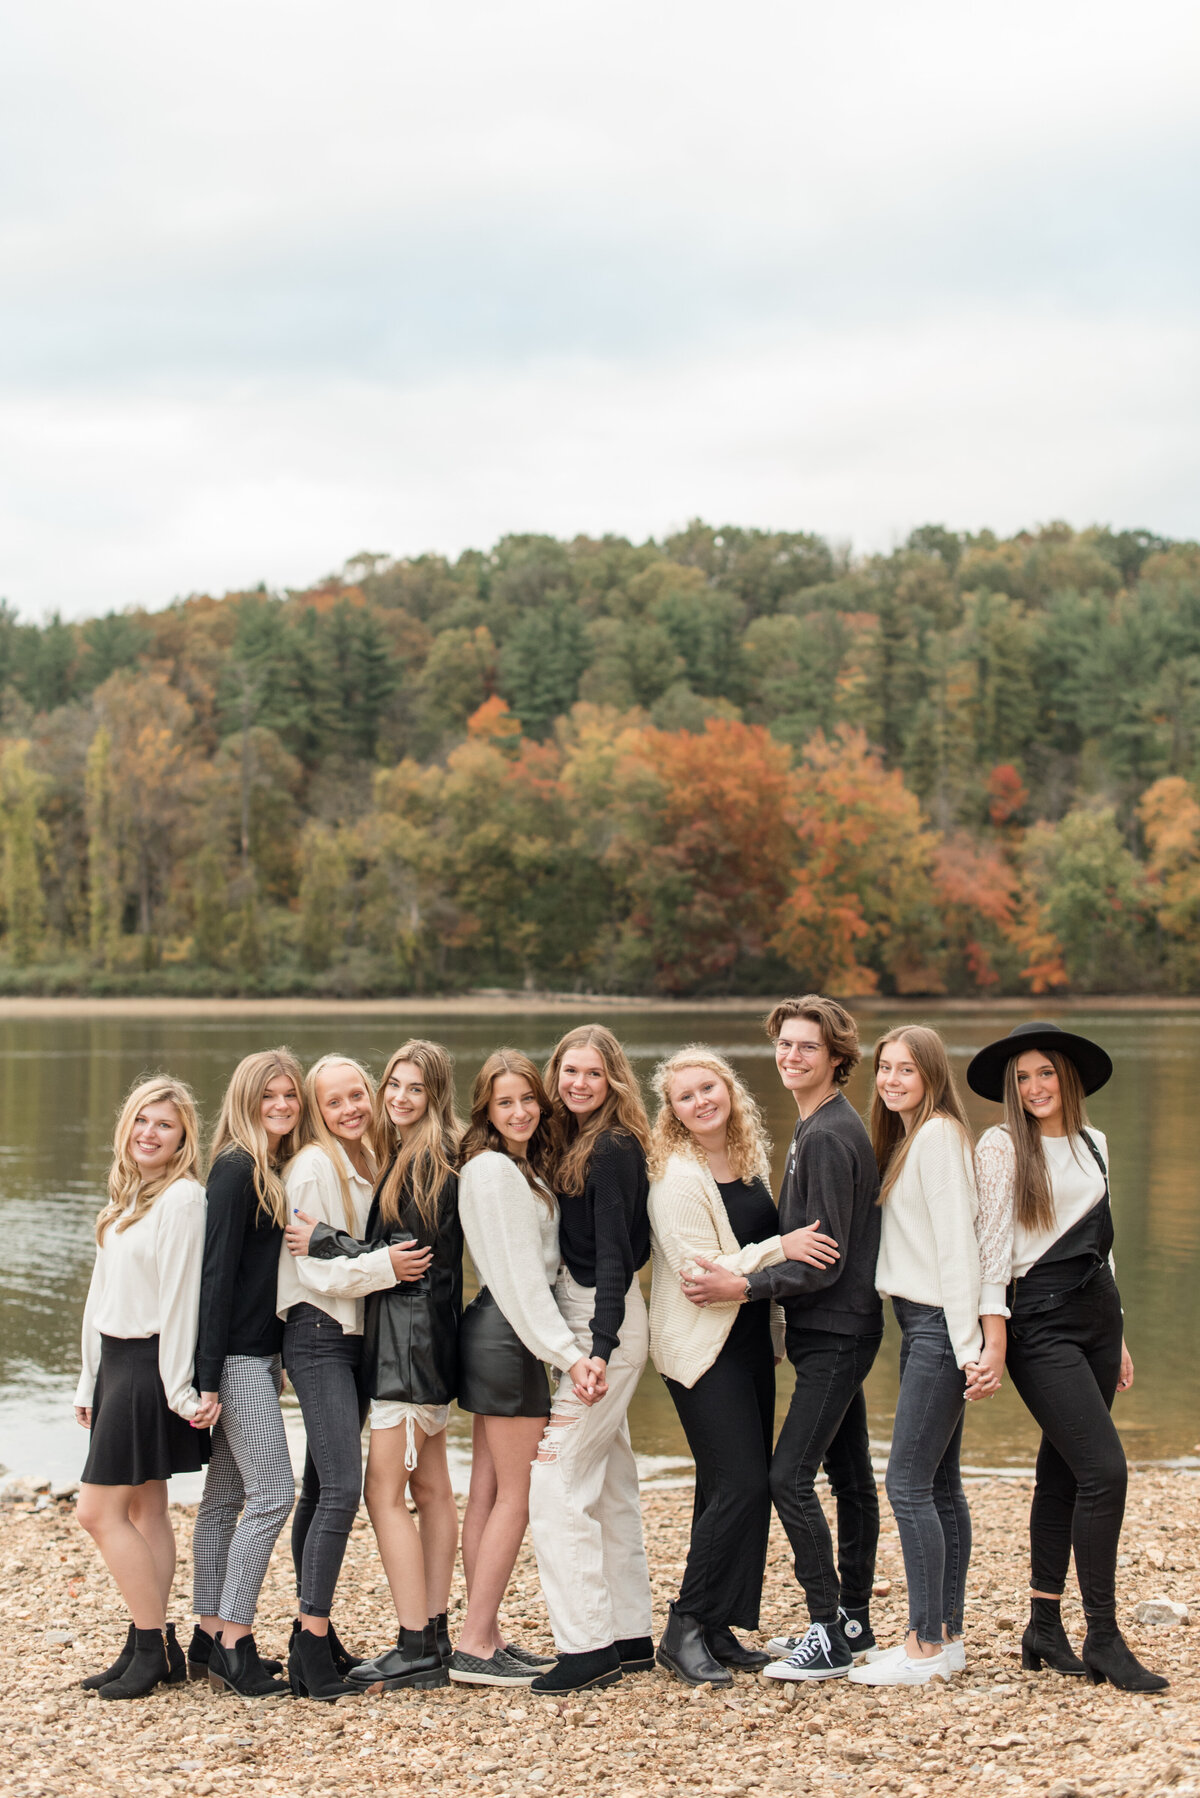 Ten Senior spokesmodels huddled together wearing black and white by lake in York, Pennsylvania on Fall day.